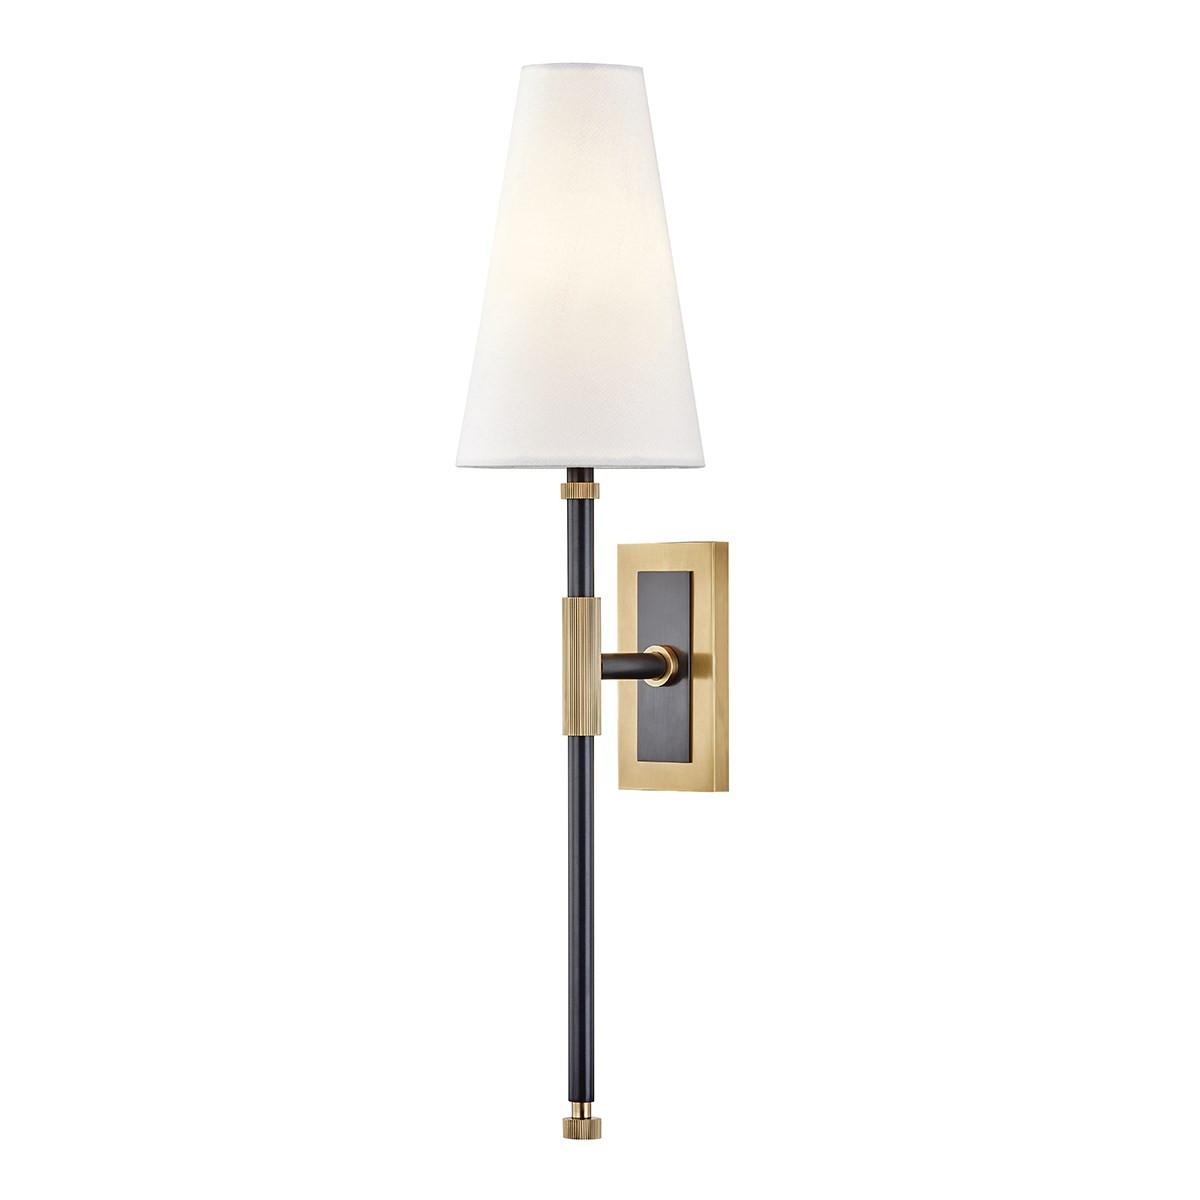 Hudson Valley | Bowery Tall Wall Light | Aged Old Bronze